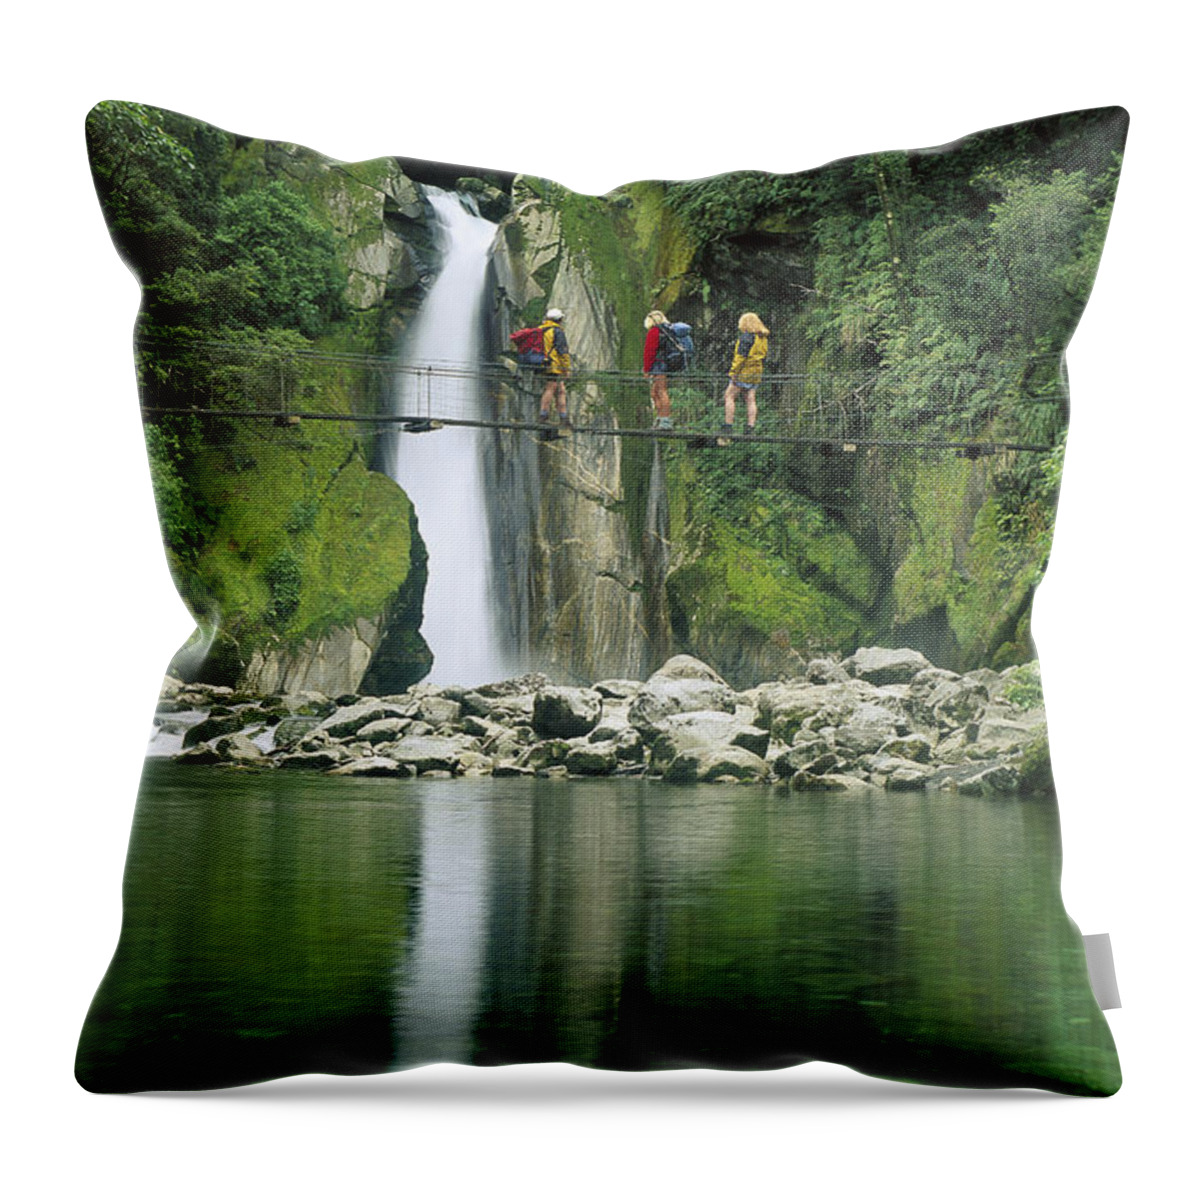 Feb0514 Throw Pillow featuring the photograph Hikers On Bridge Giants Gates Falls by Colin Monteath